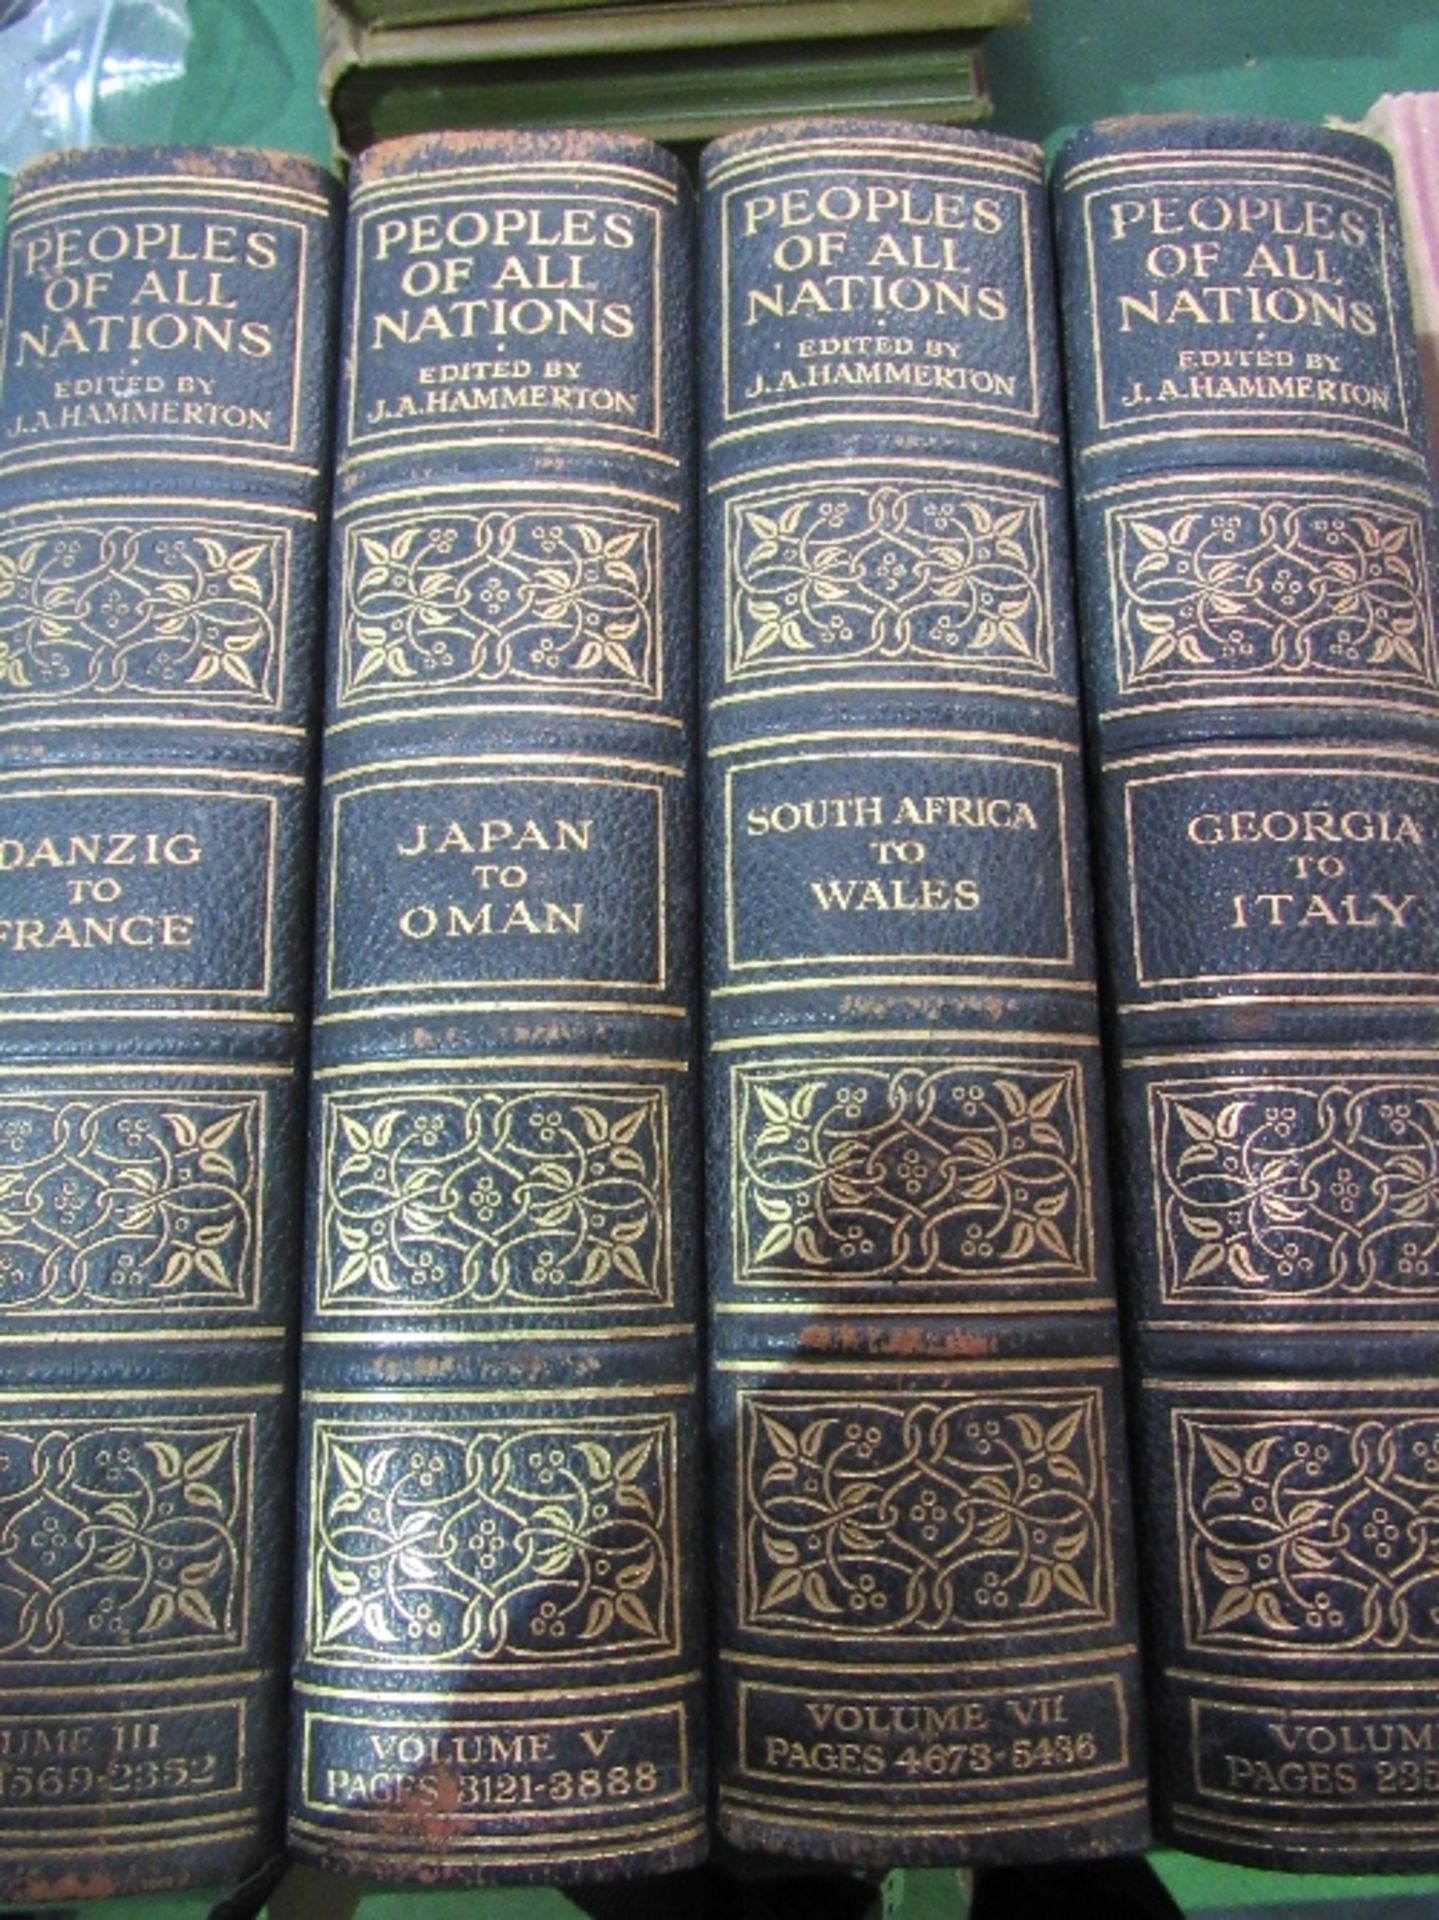 7 volumes of 'Peoples of All Nations' c/w colour plates & maps, circa 1920's. Estimate £10-20.